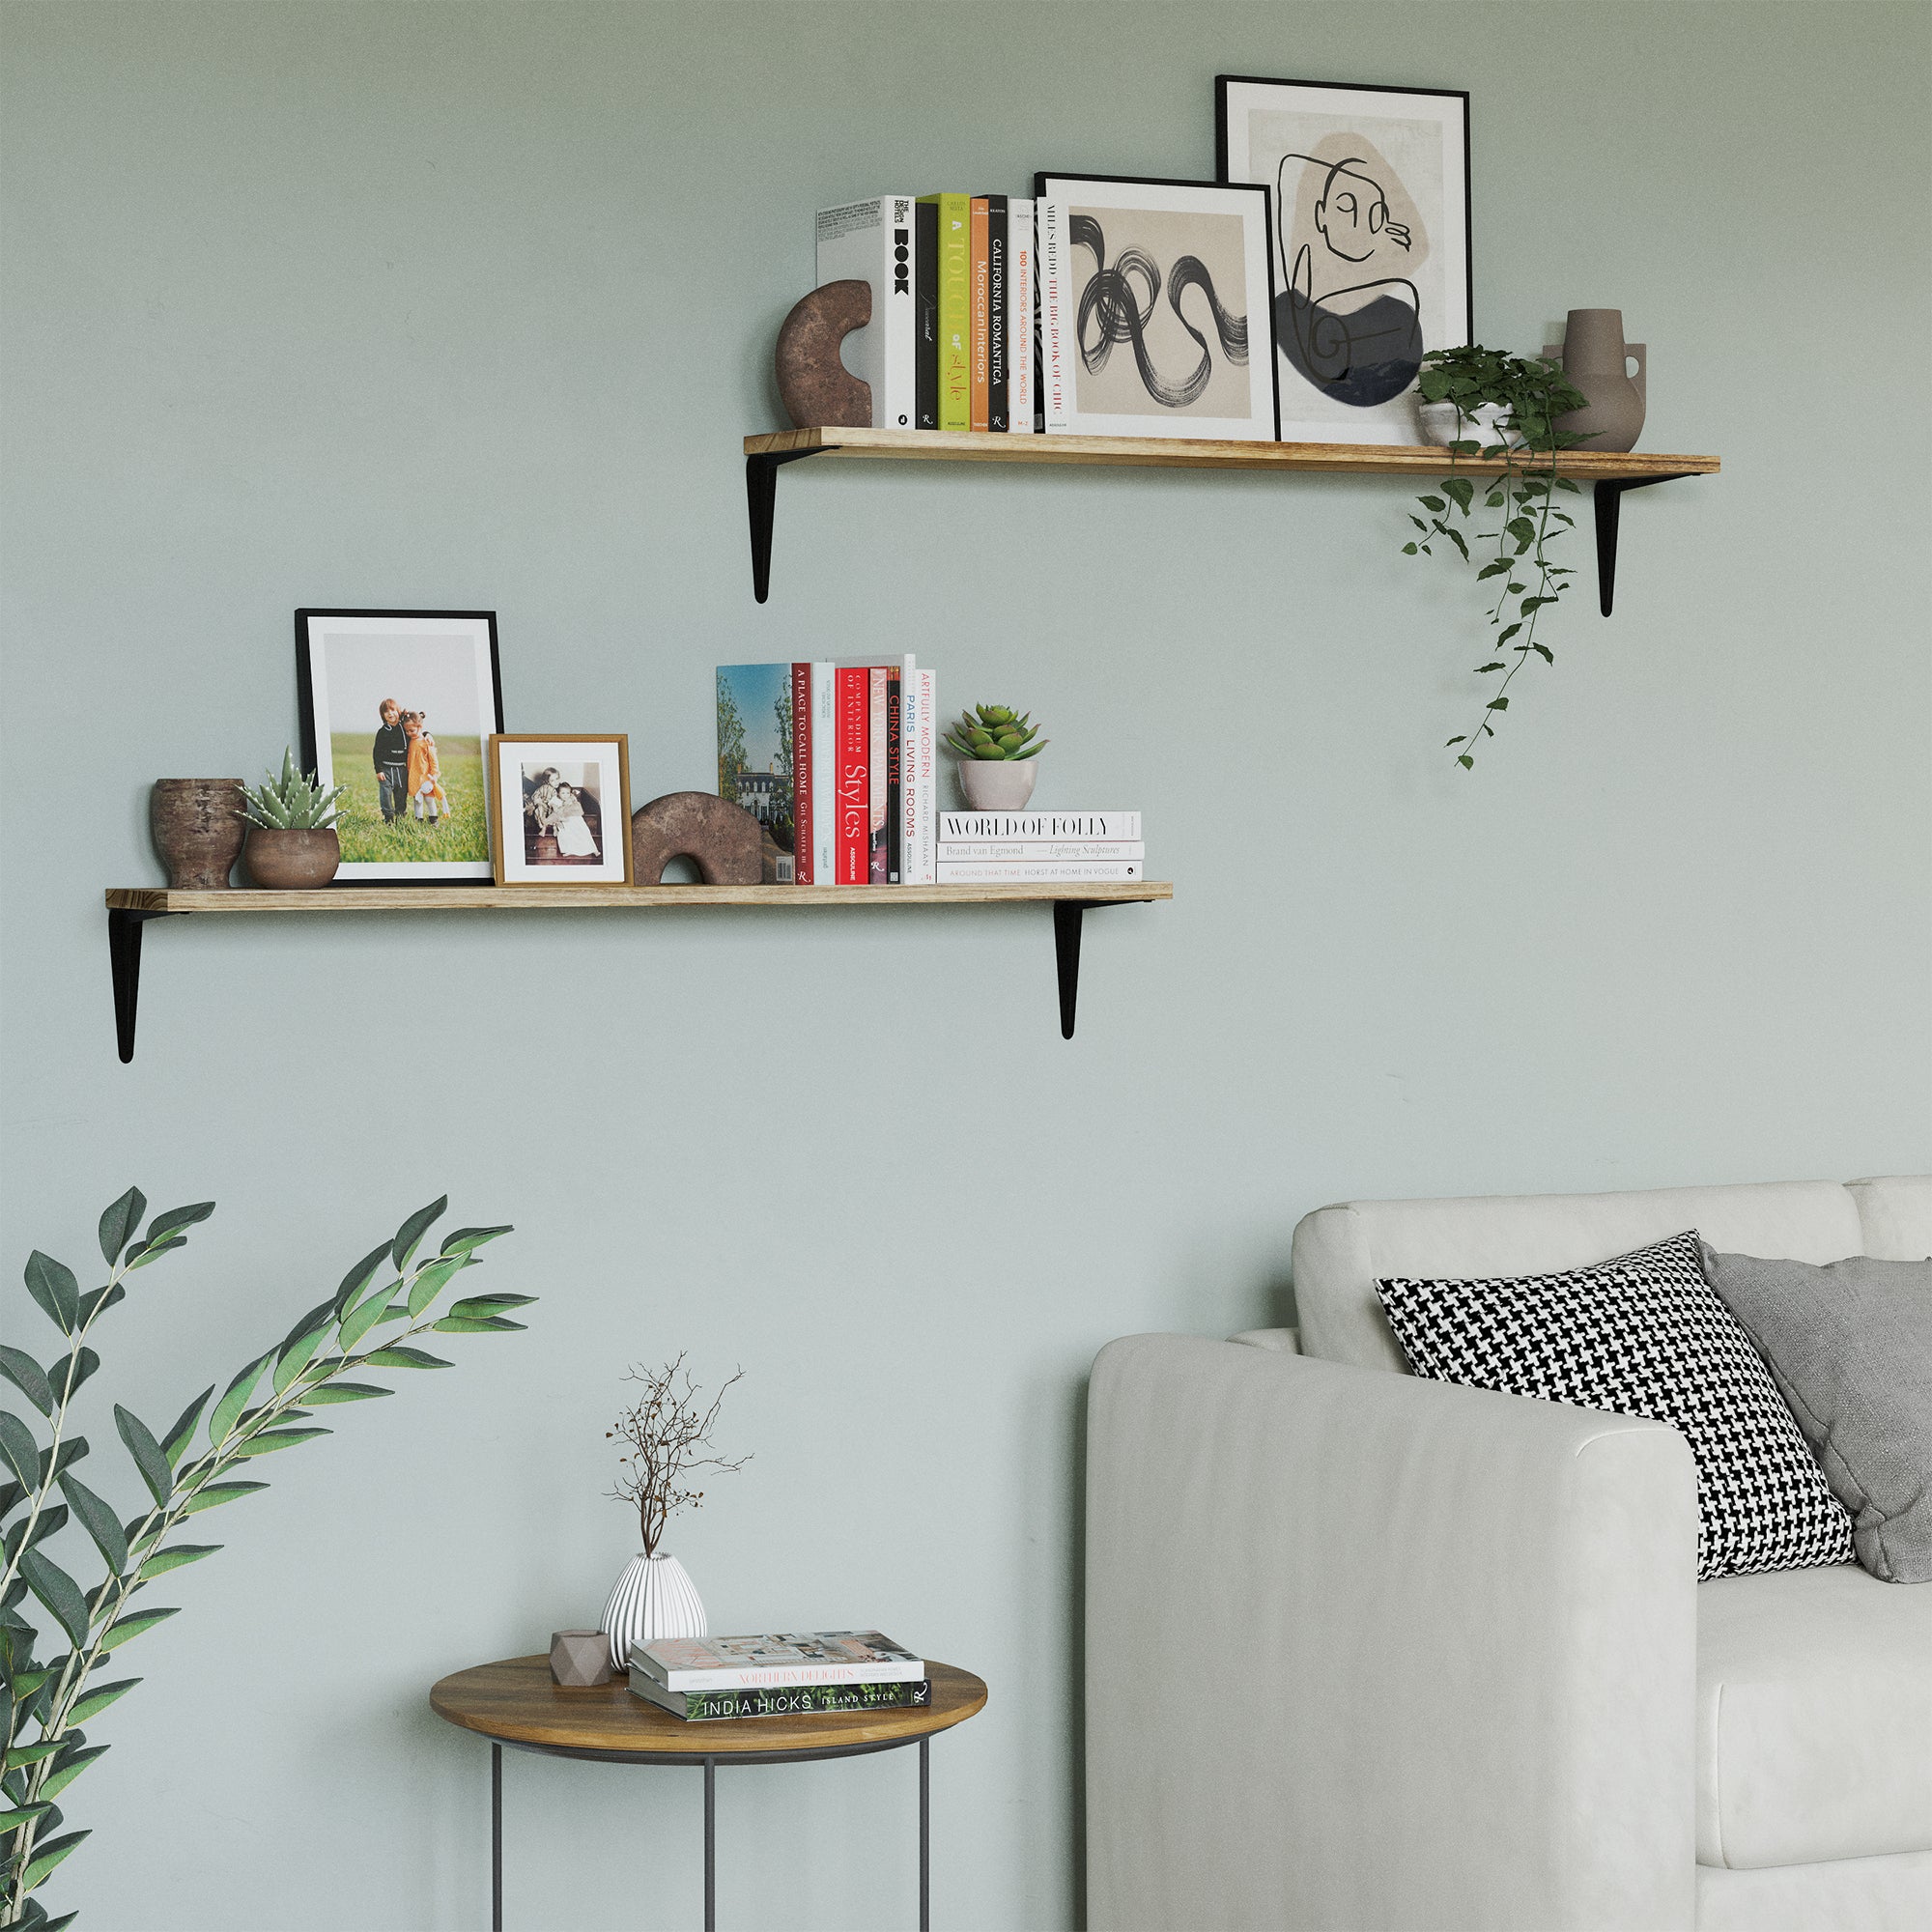 Living room decor with floating bookshelves for wall displaying books, decorative items, and framed artwork.